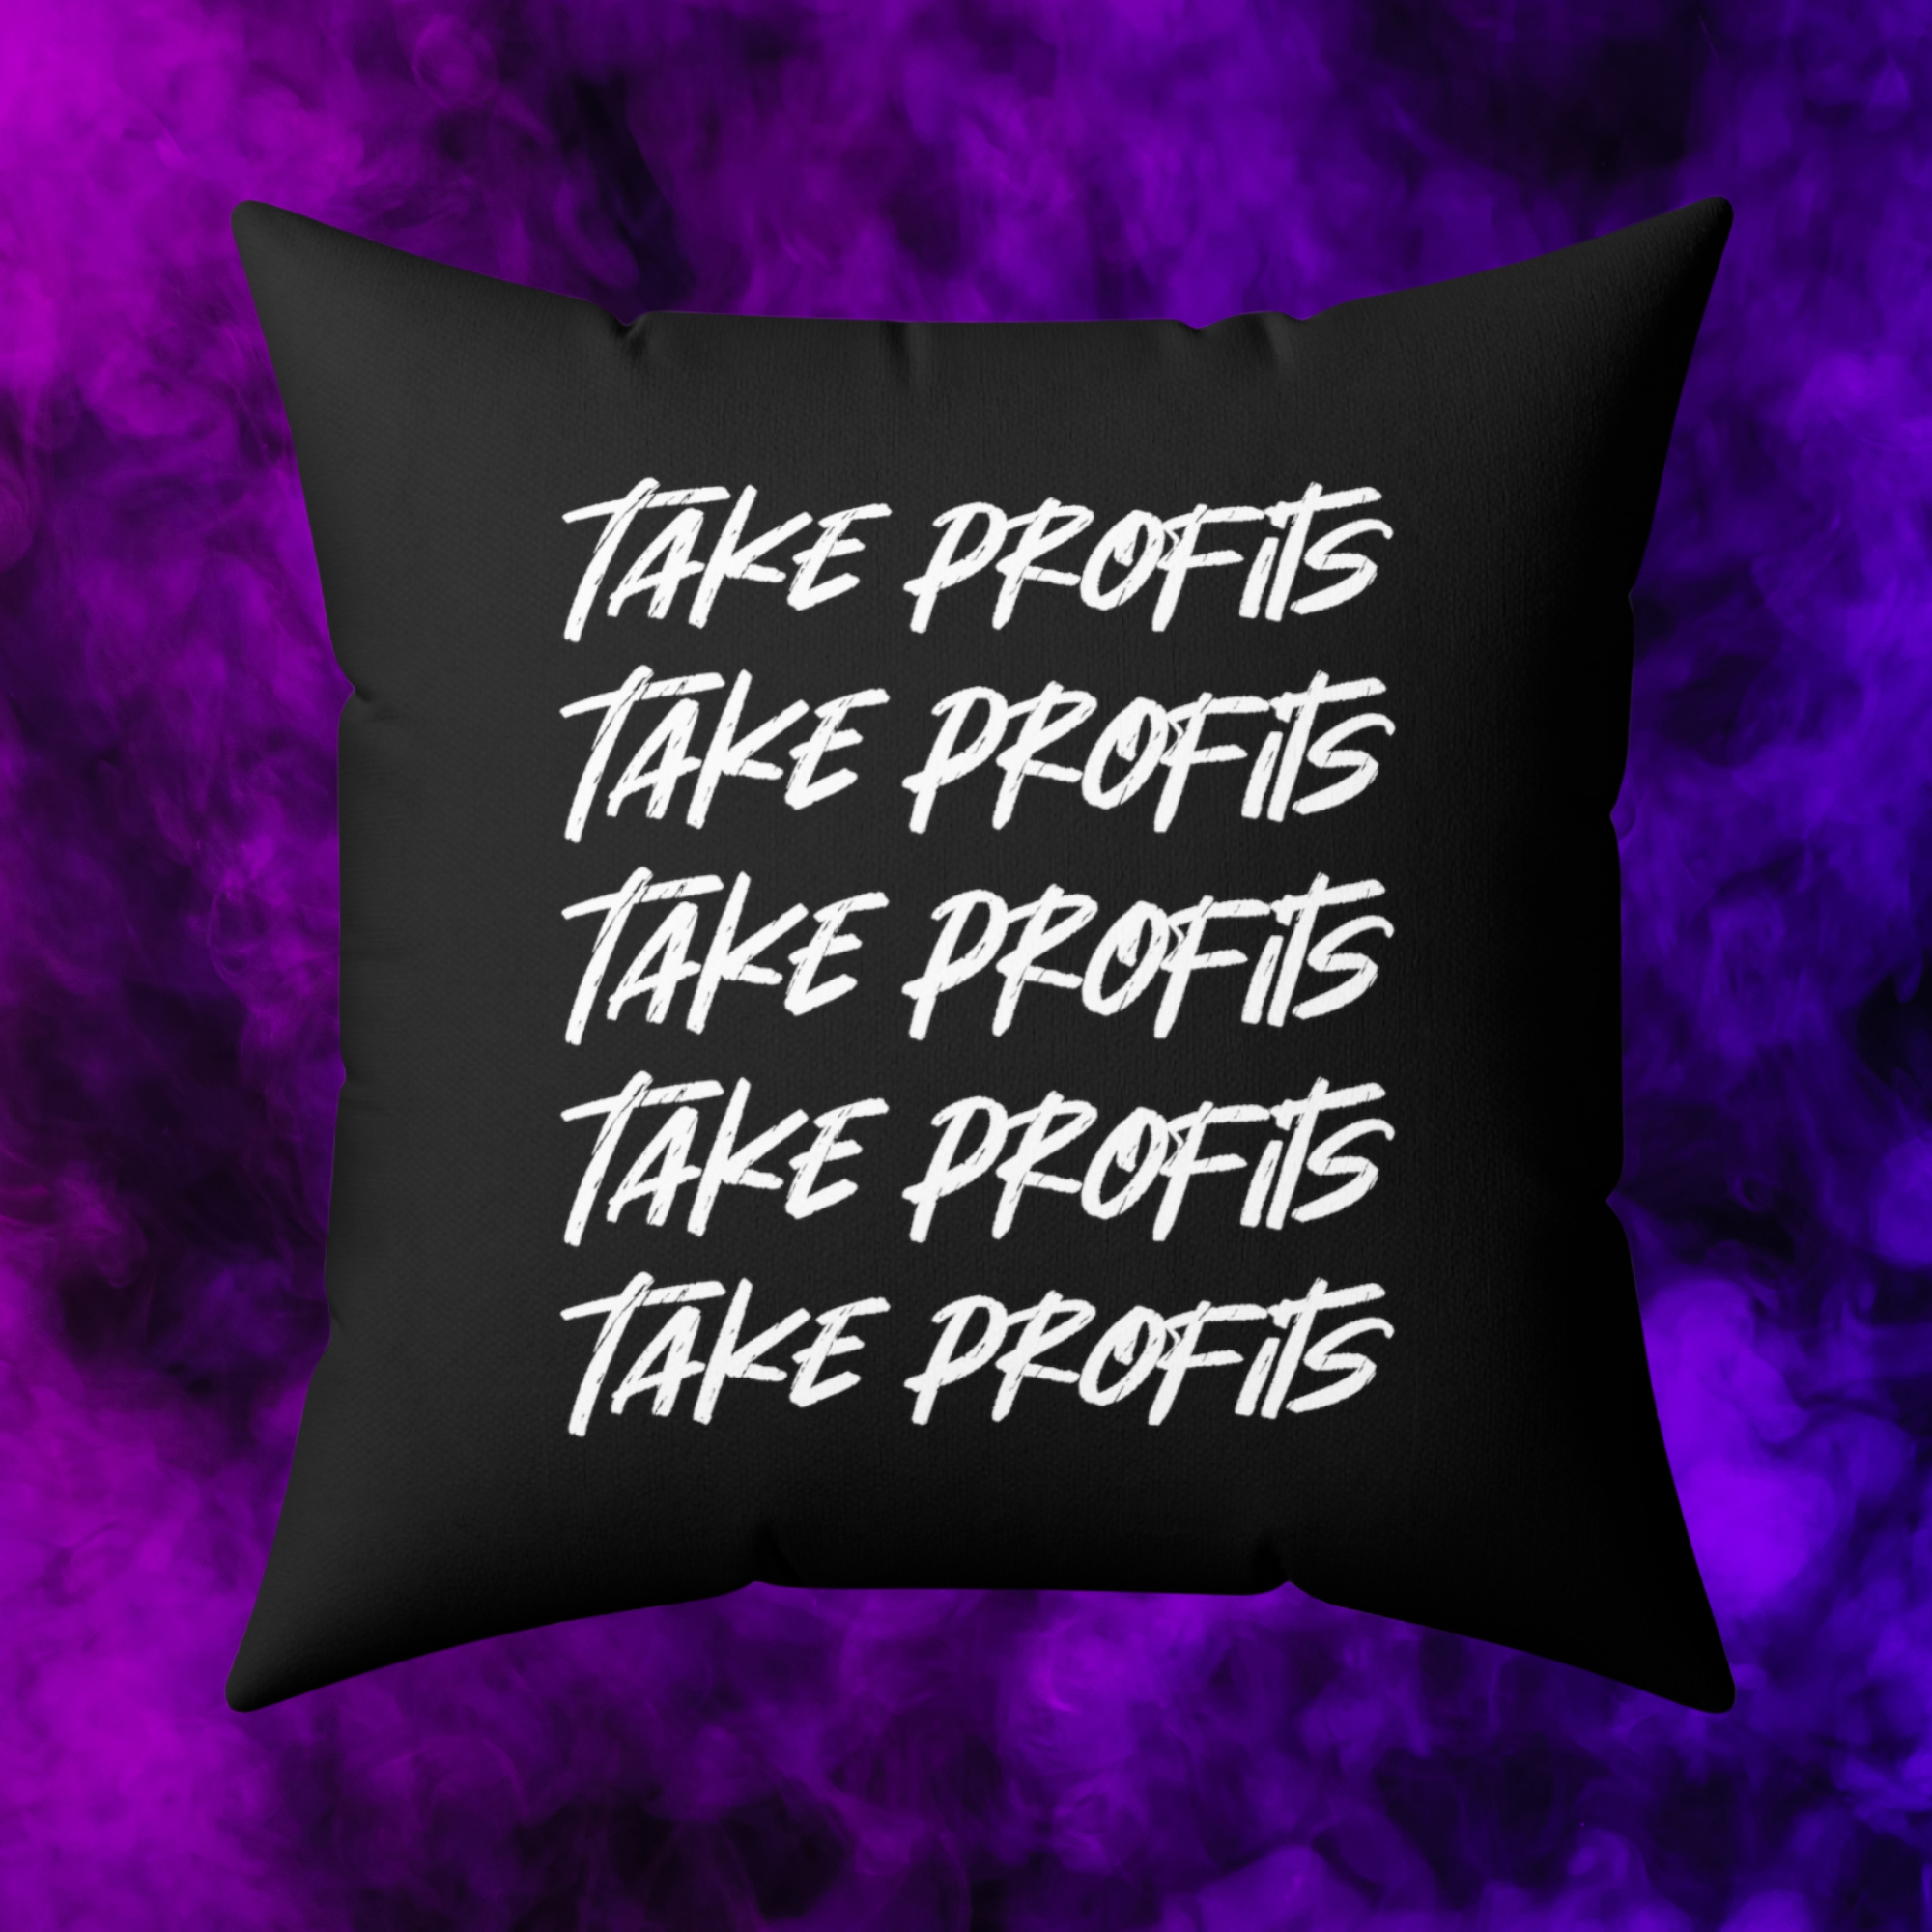 Crypto Home Decor - Take Profits Pillow available from NEONCRYPTO STORE.